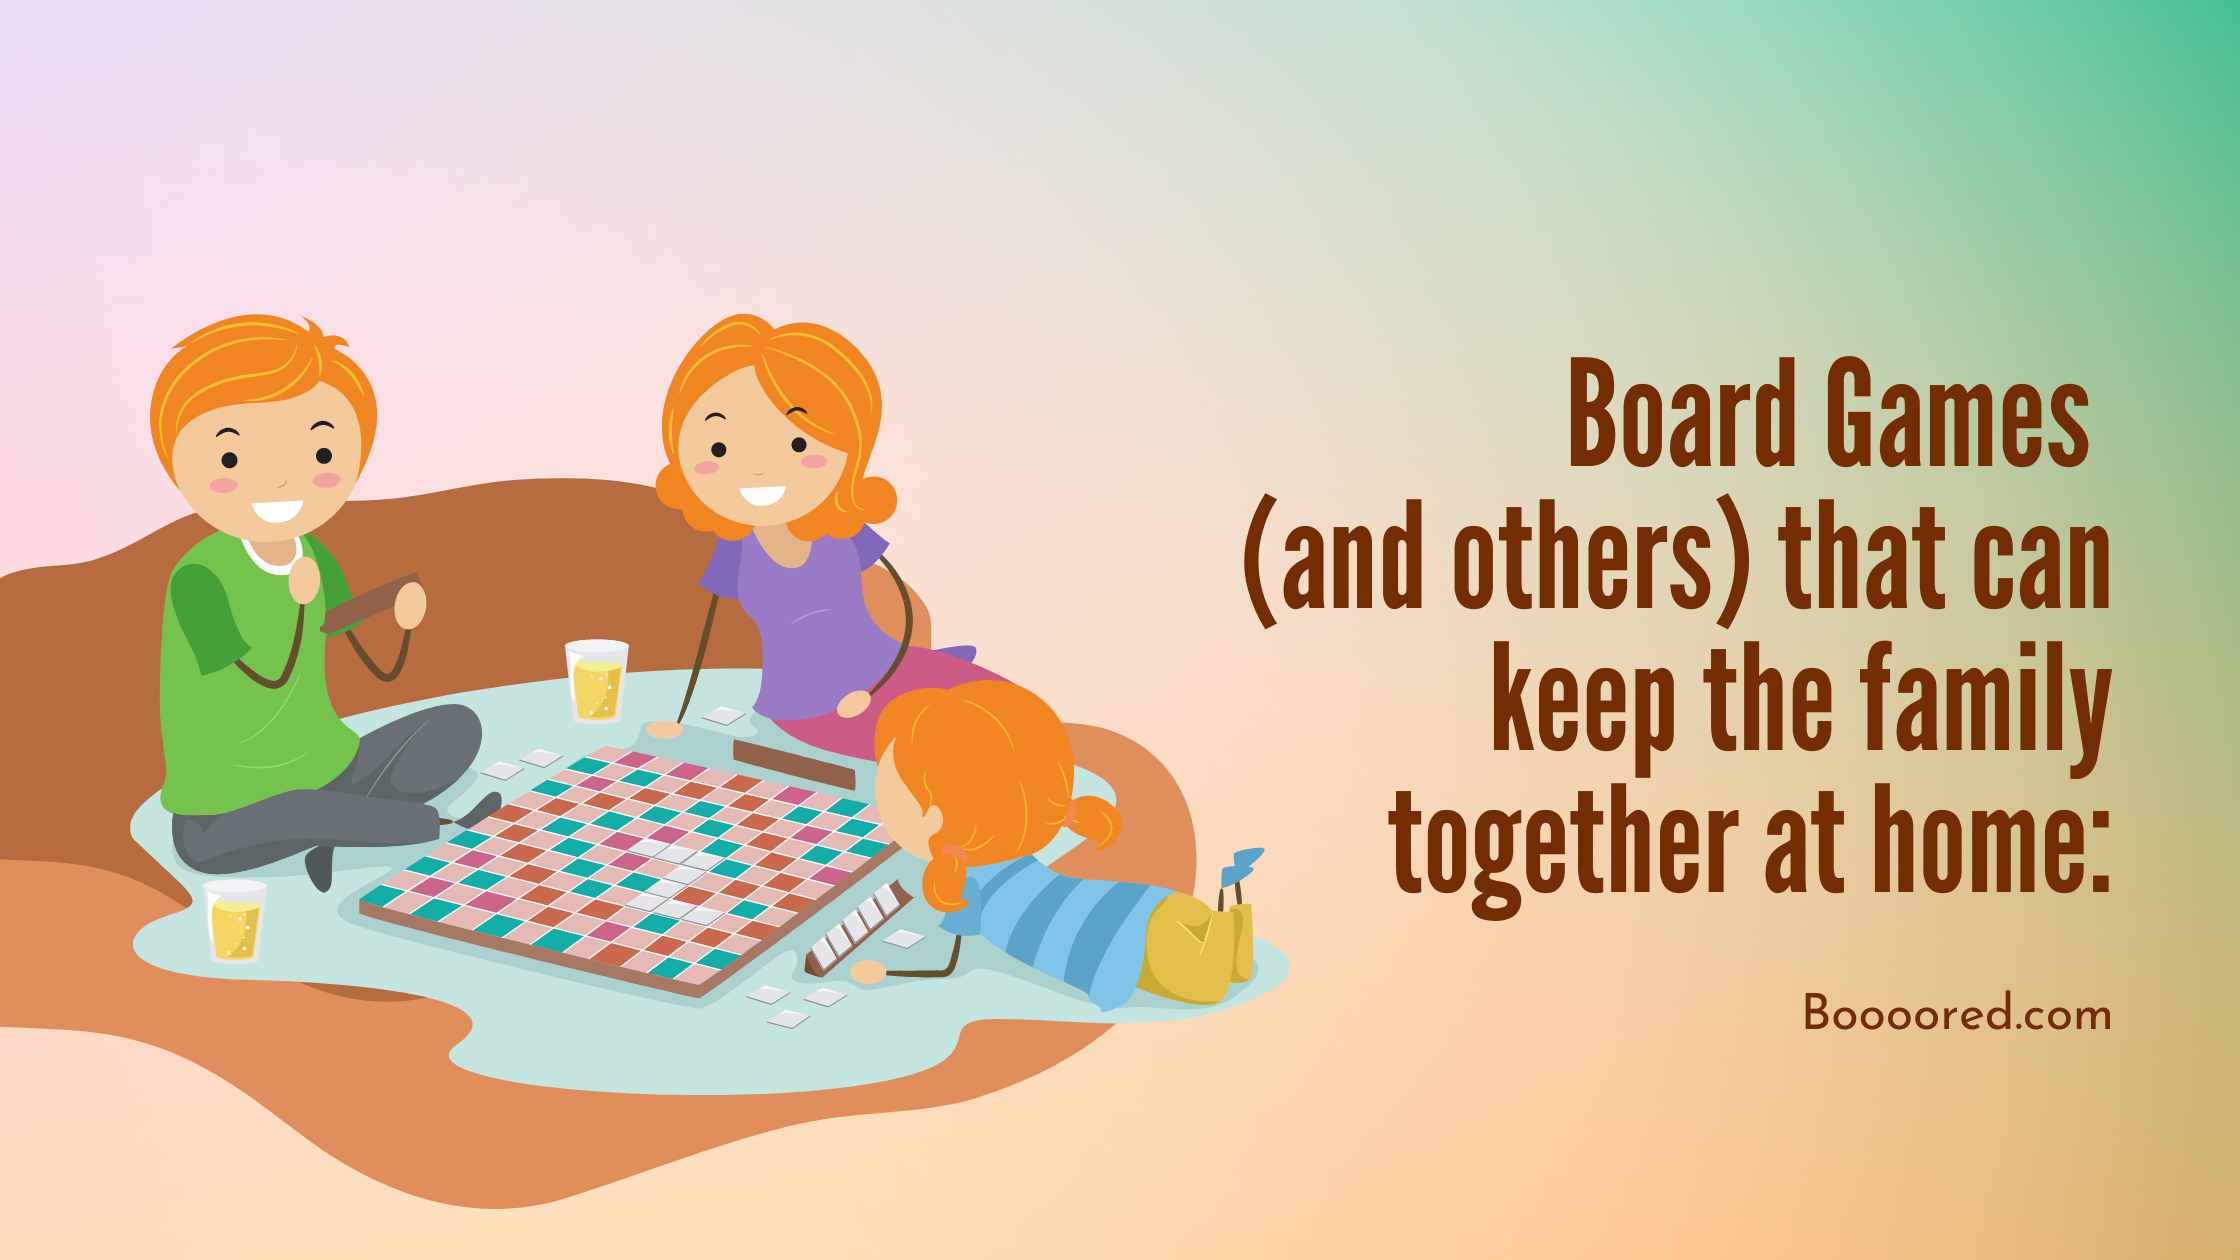 Board Games (and others) that can keep the family together at home